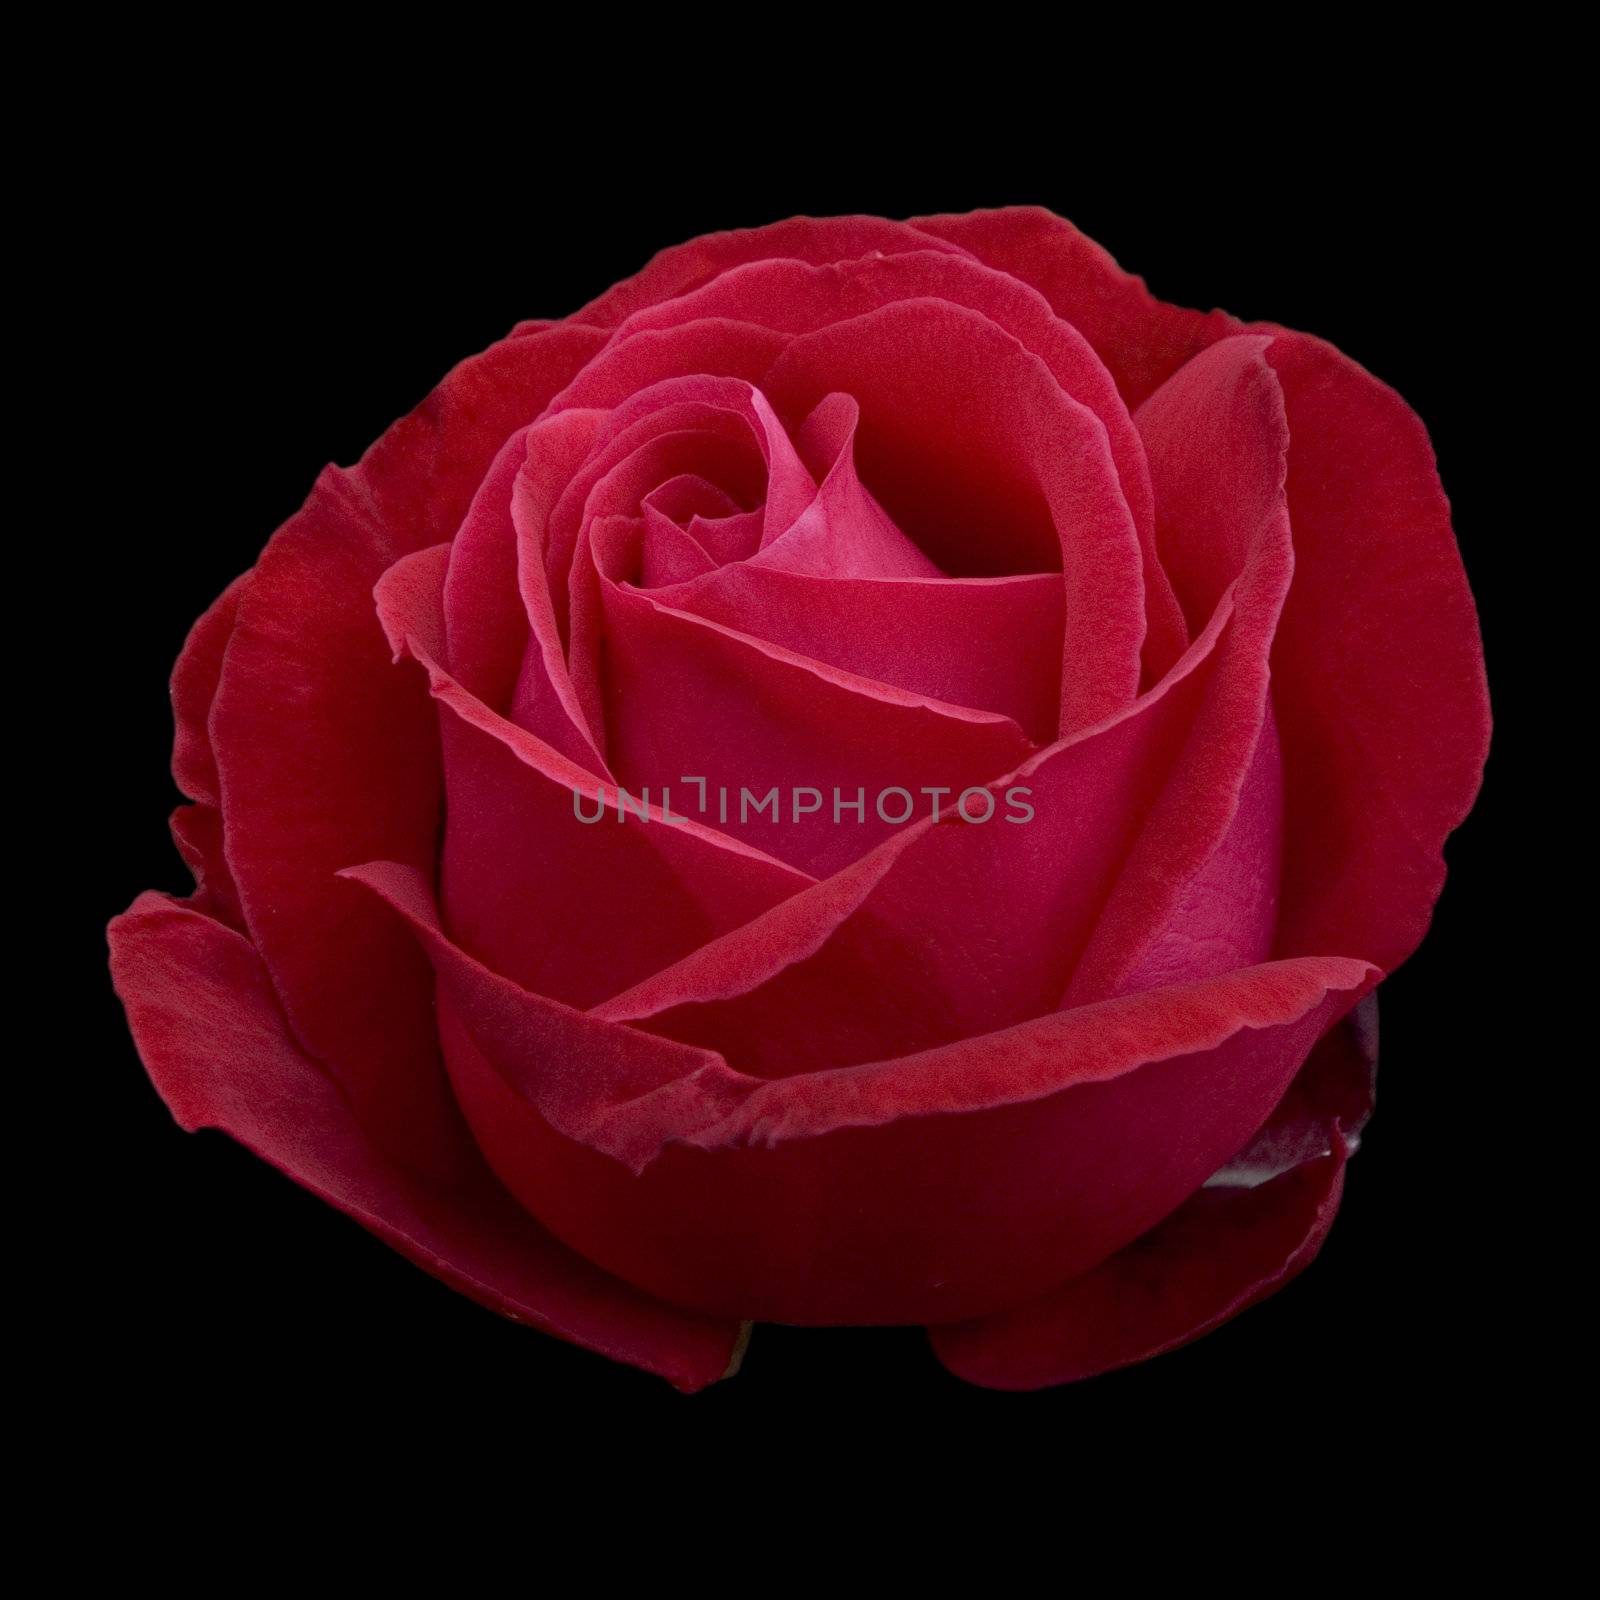 Beautiful red Hybrid Tea rose "Alec's Red" by jmci